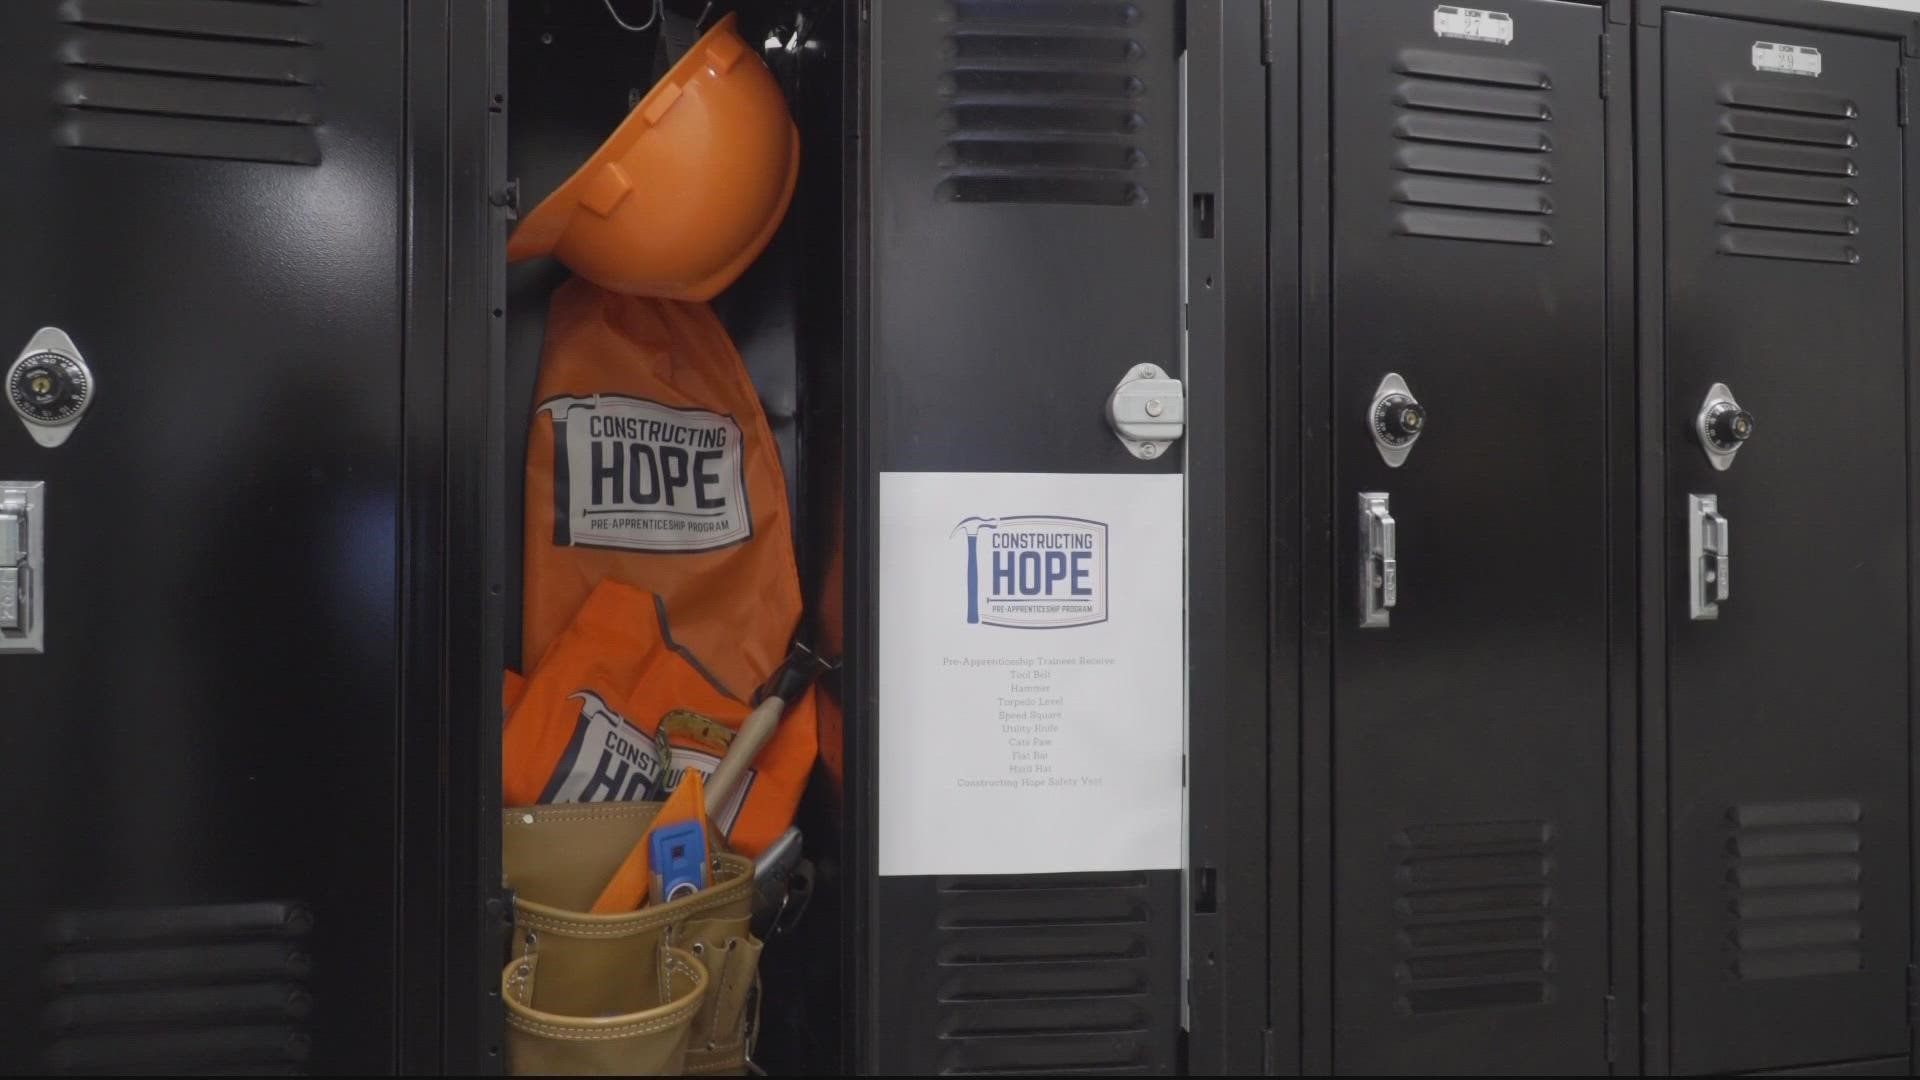 Constructing Hope has helped thousands of people find work in construction. Most of those people are BIPOC, low-income or recently released from the prison system.